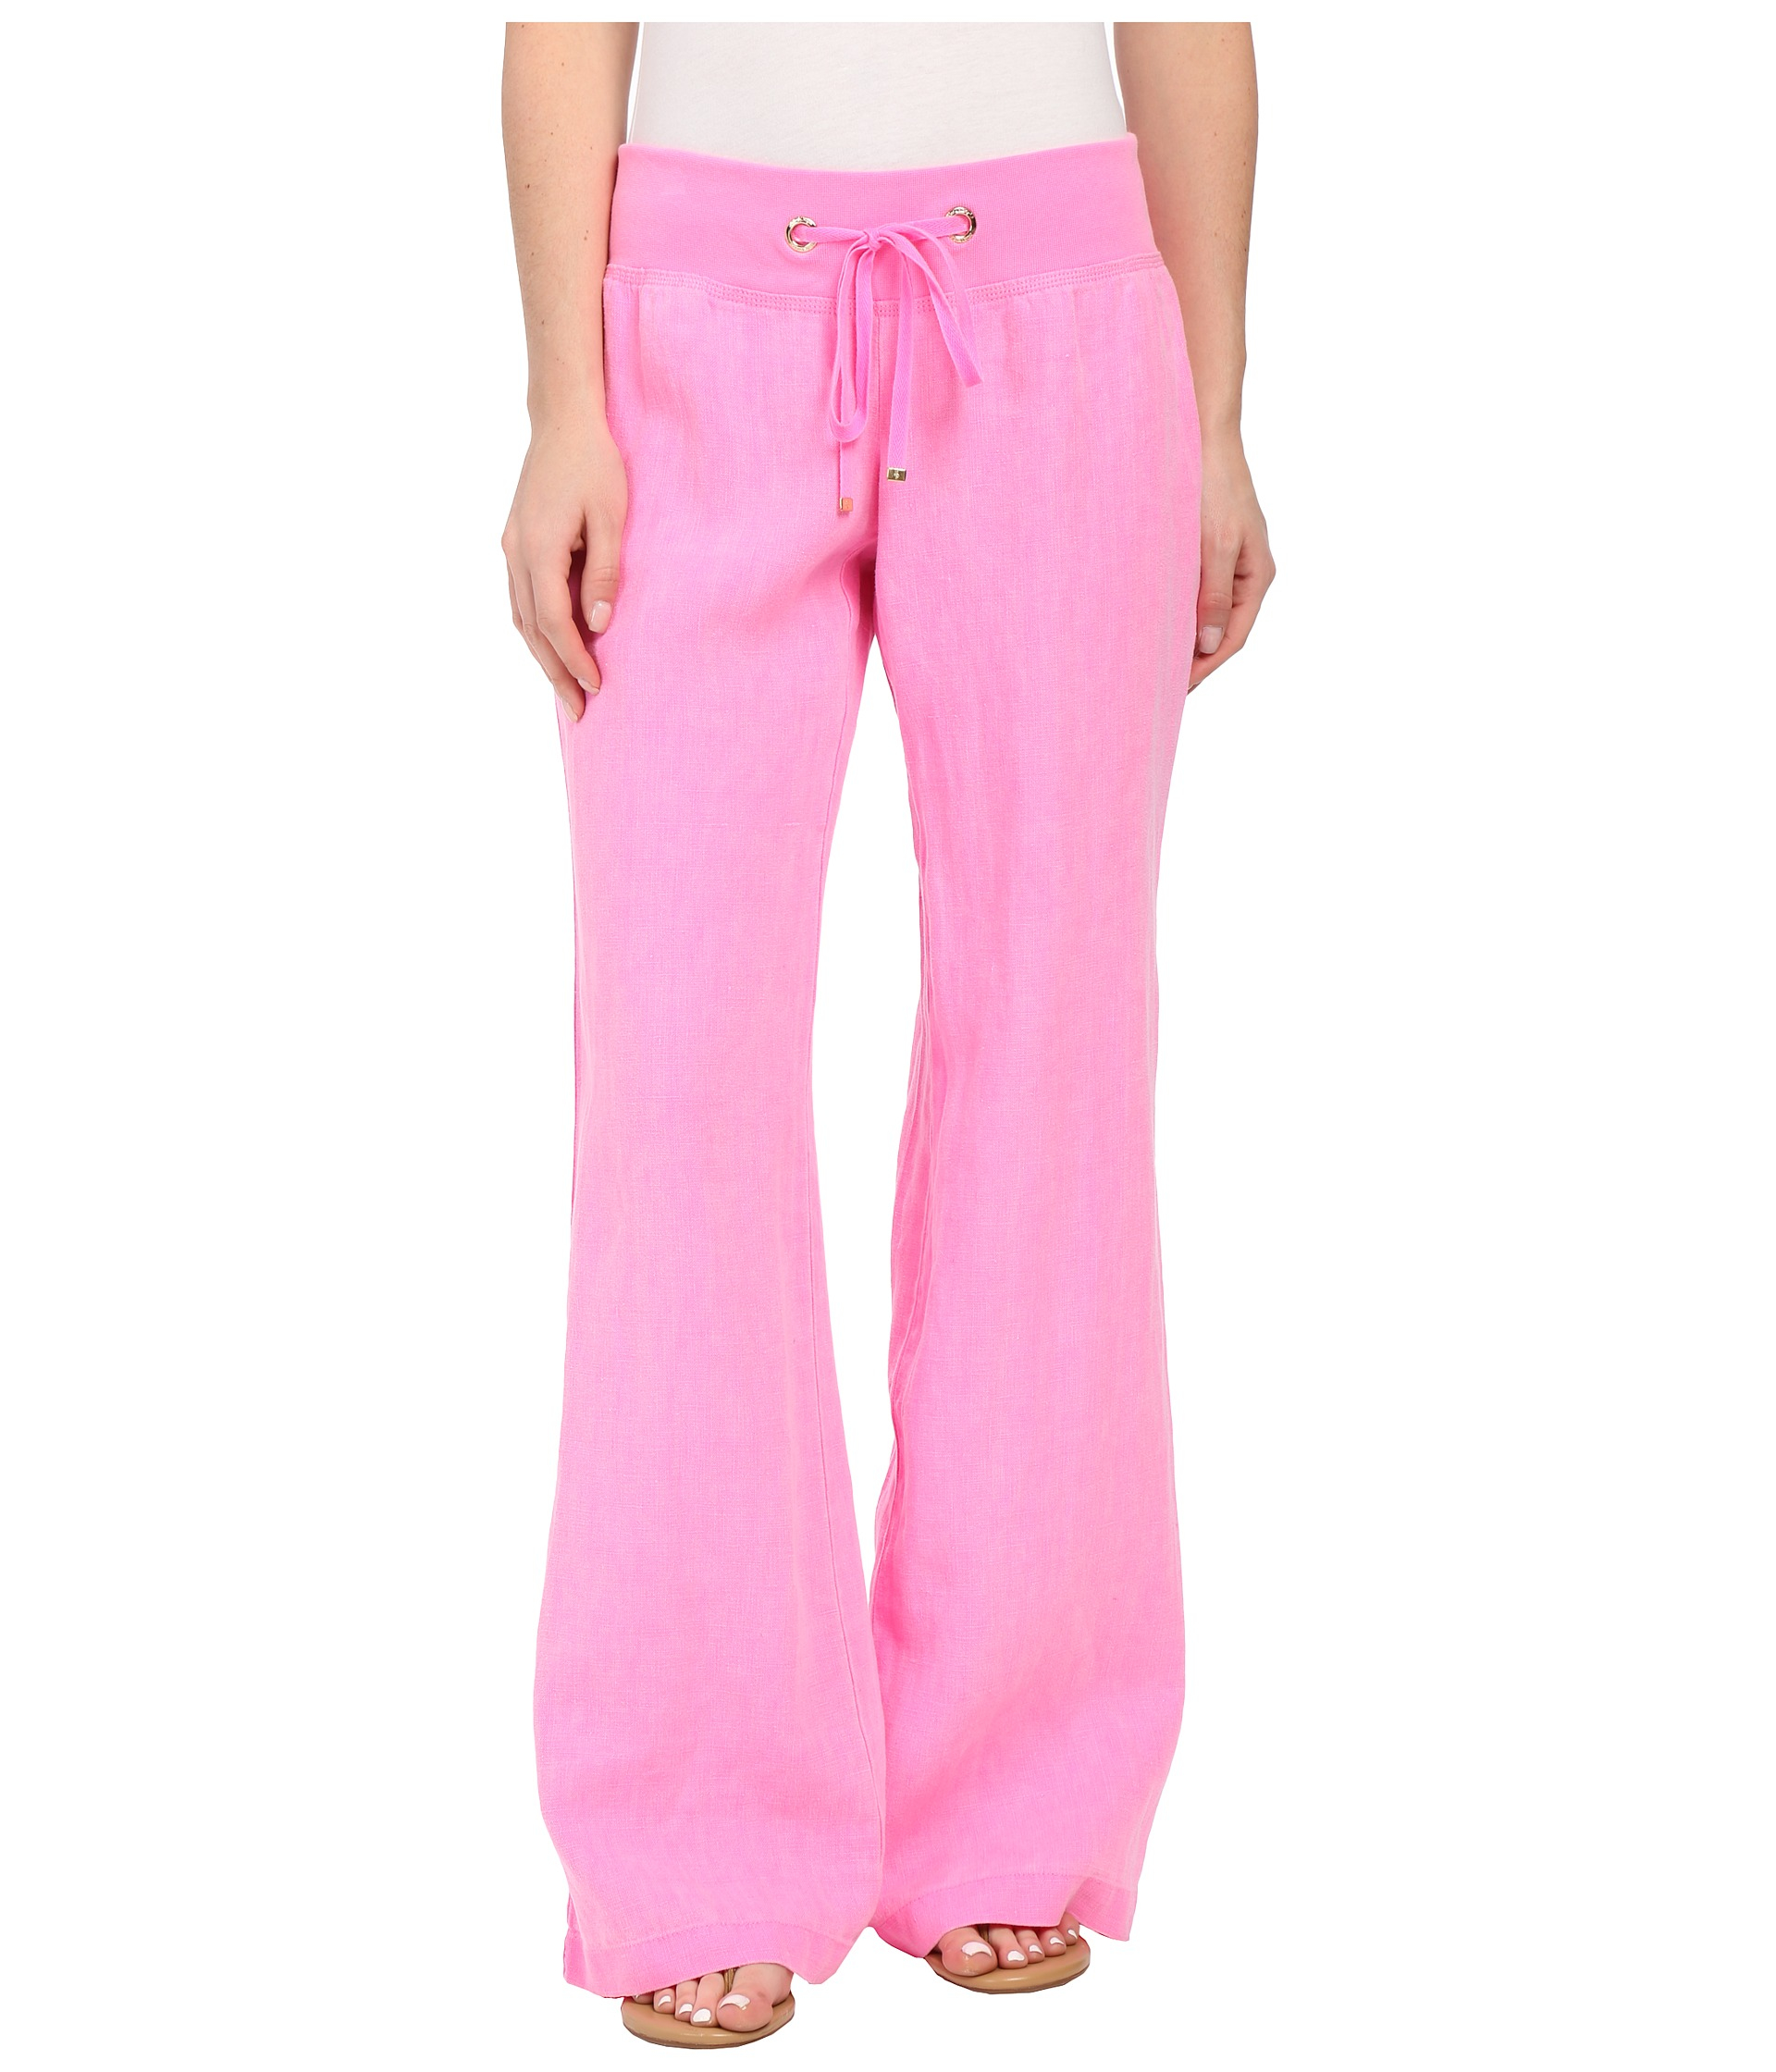 Lyst - Lilly Pulitzer Beach Pant in Pink